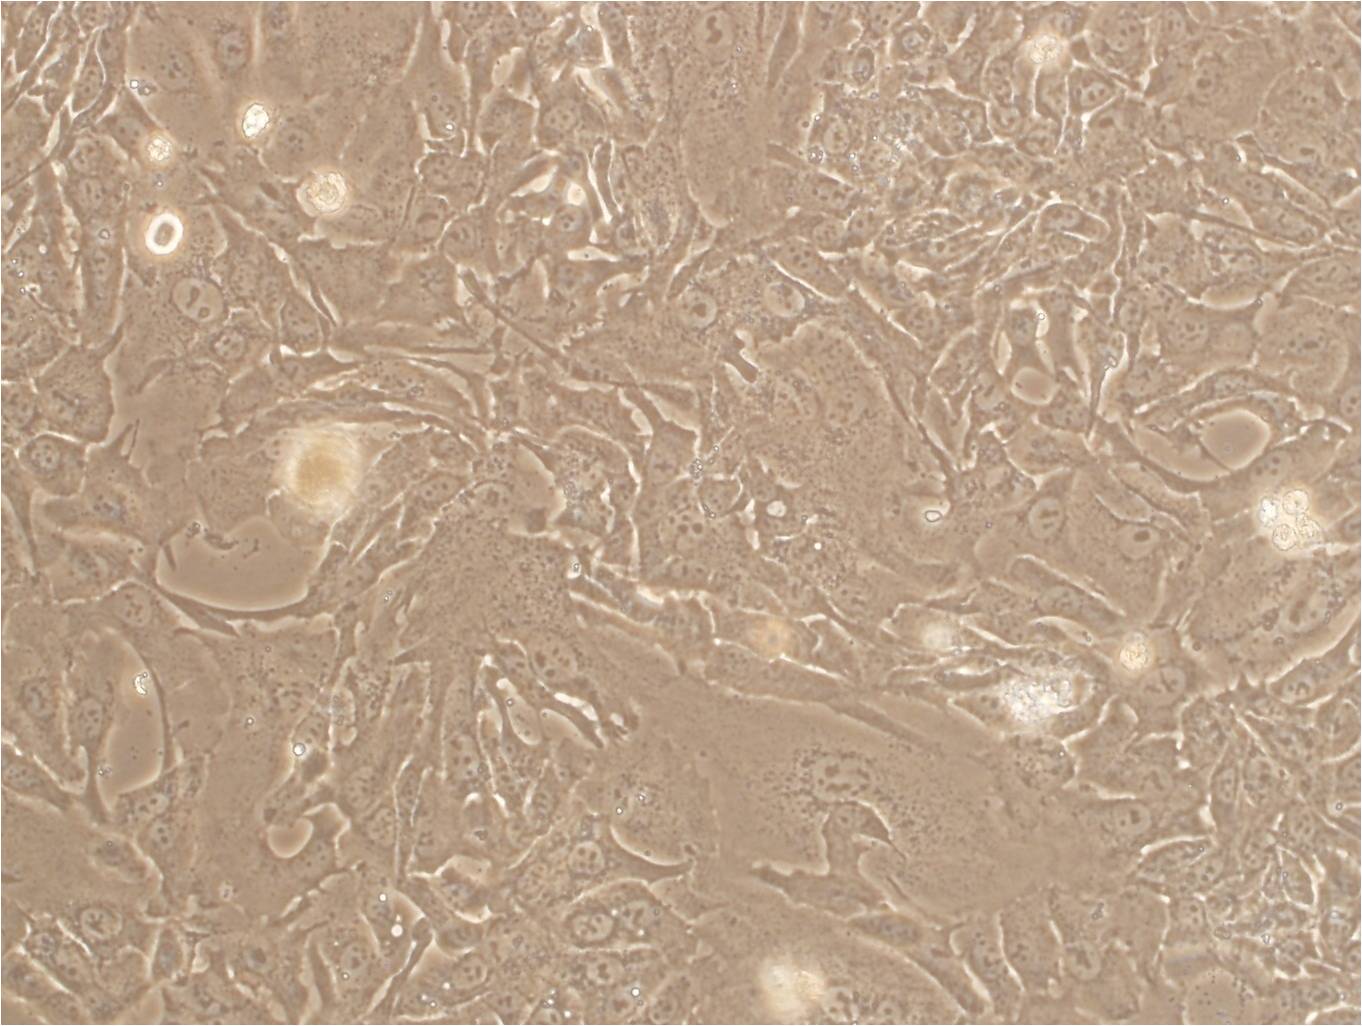 KYSE-50 Epithelial Cell|低分化人食管鳞癌传代细胞(有STR鉴定),KYSE-50 Epithelial Cell